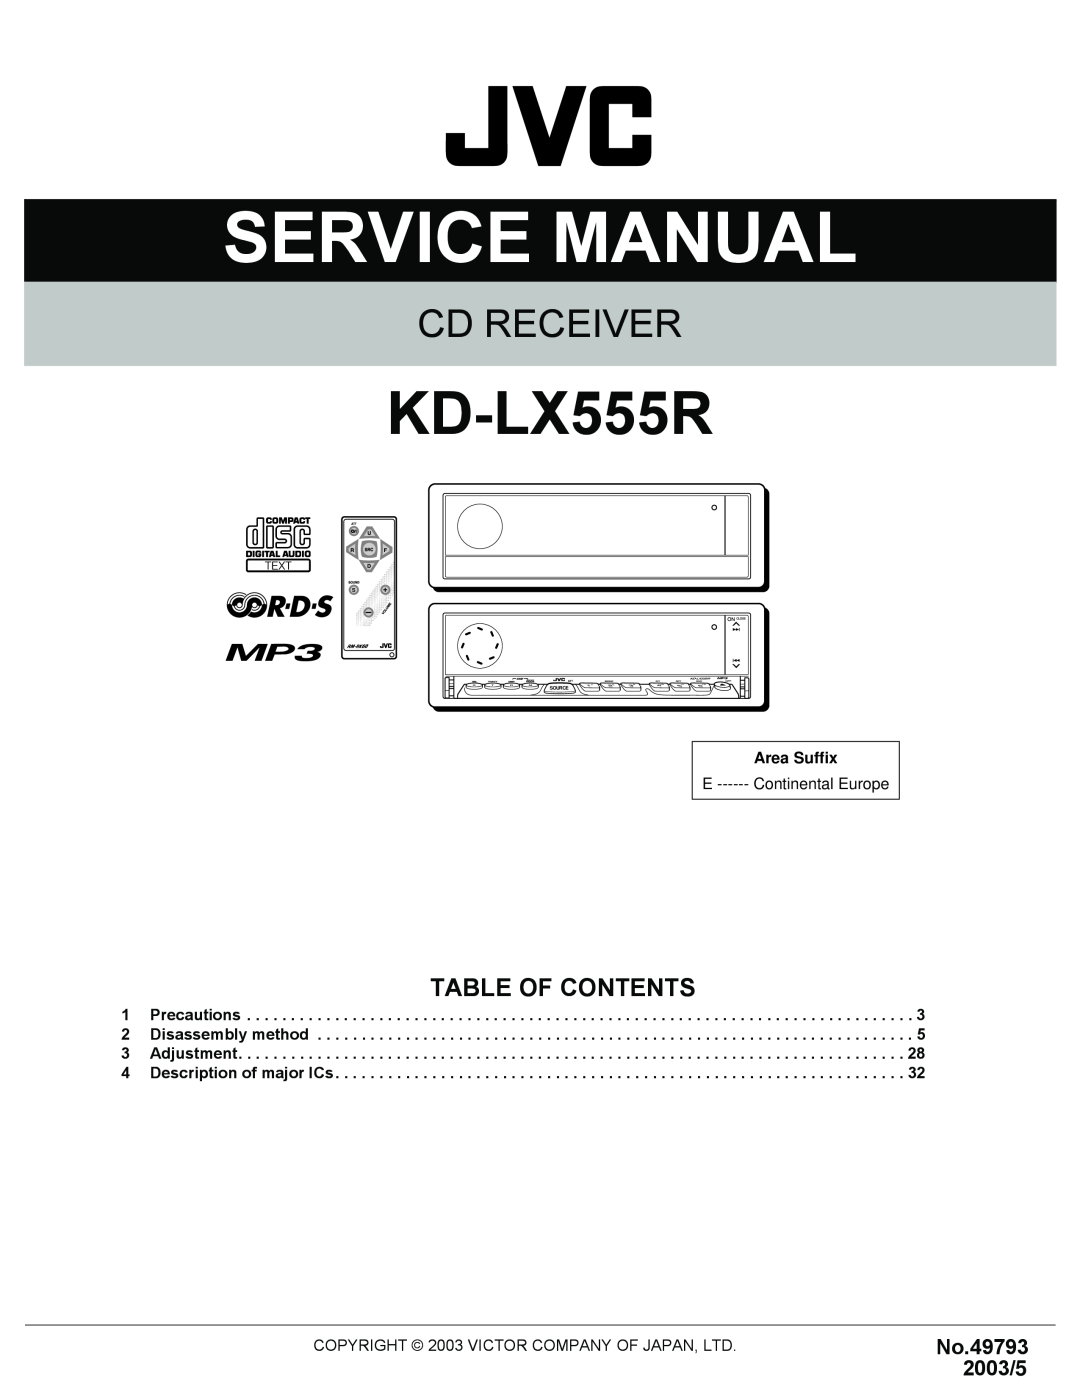 JVC KD-LX555R service manual Table Of Contents, Cd Receiver, No.49793 2003/5 